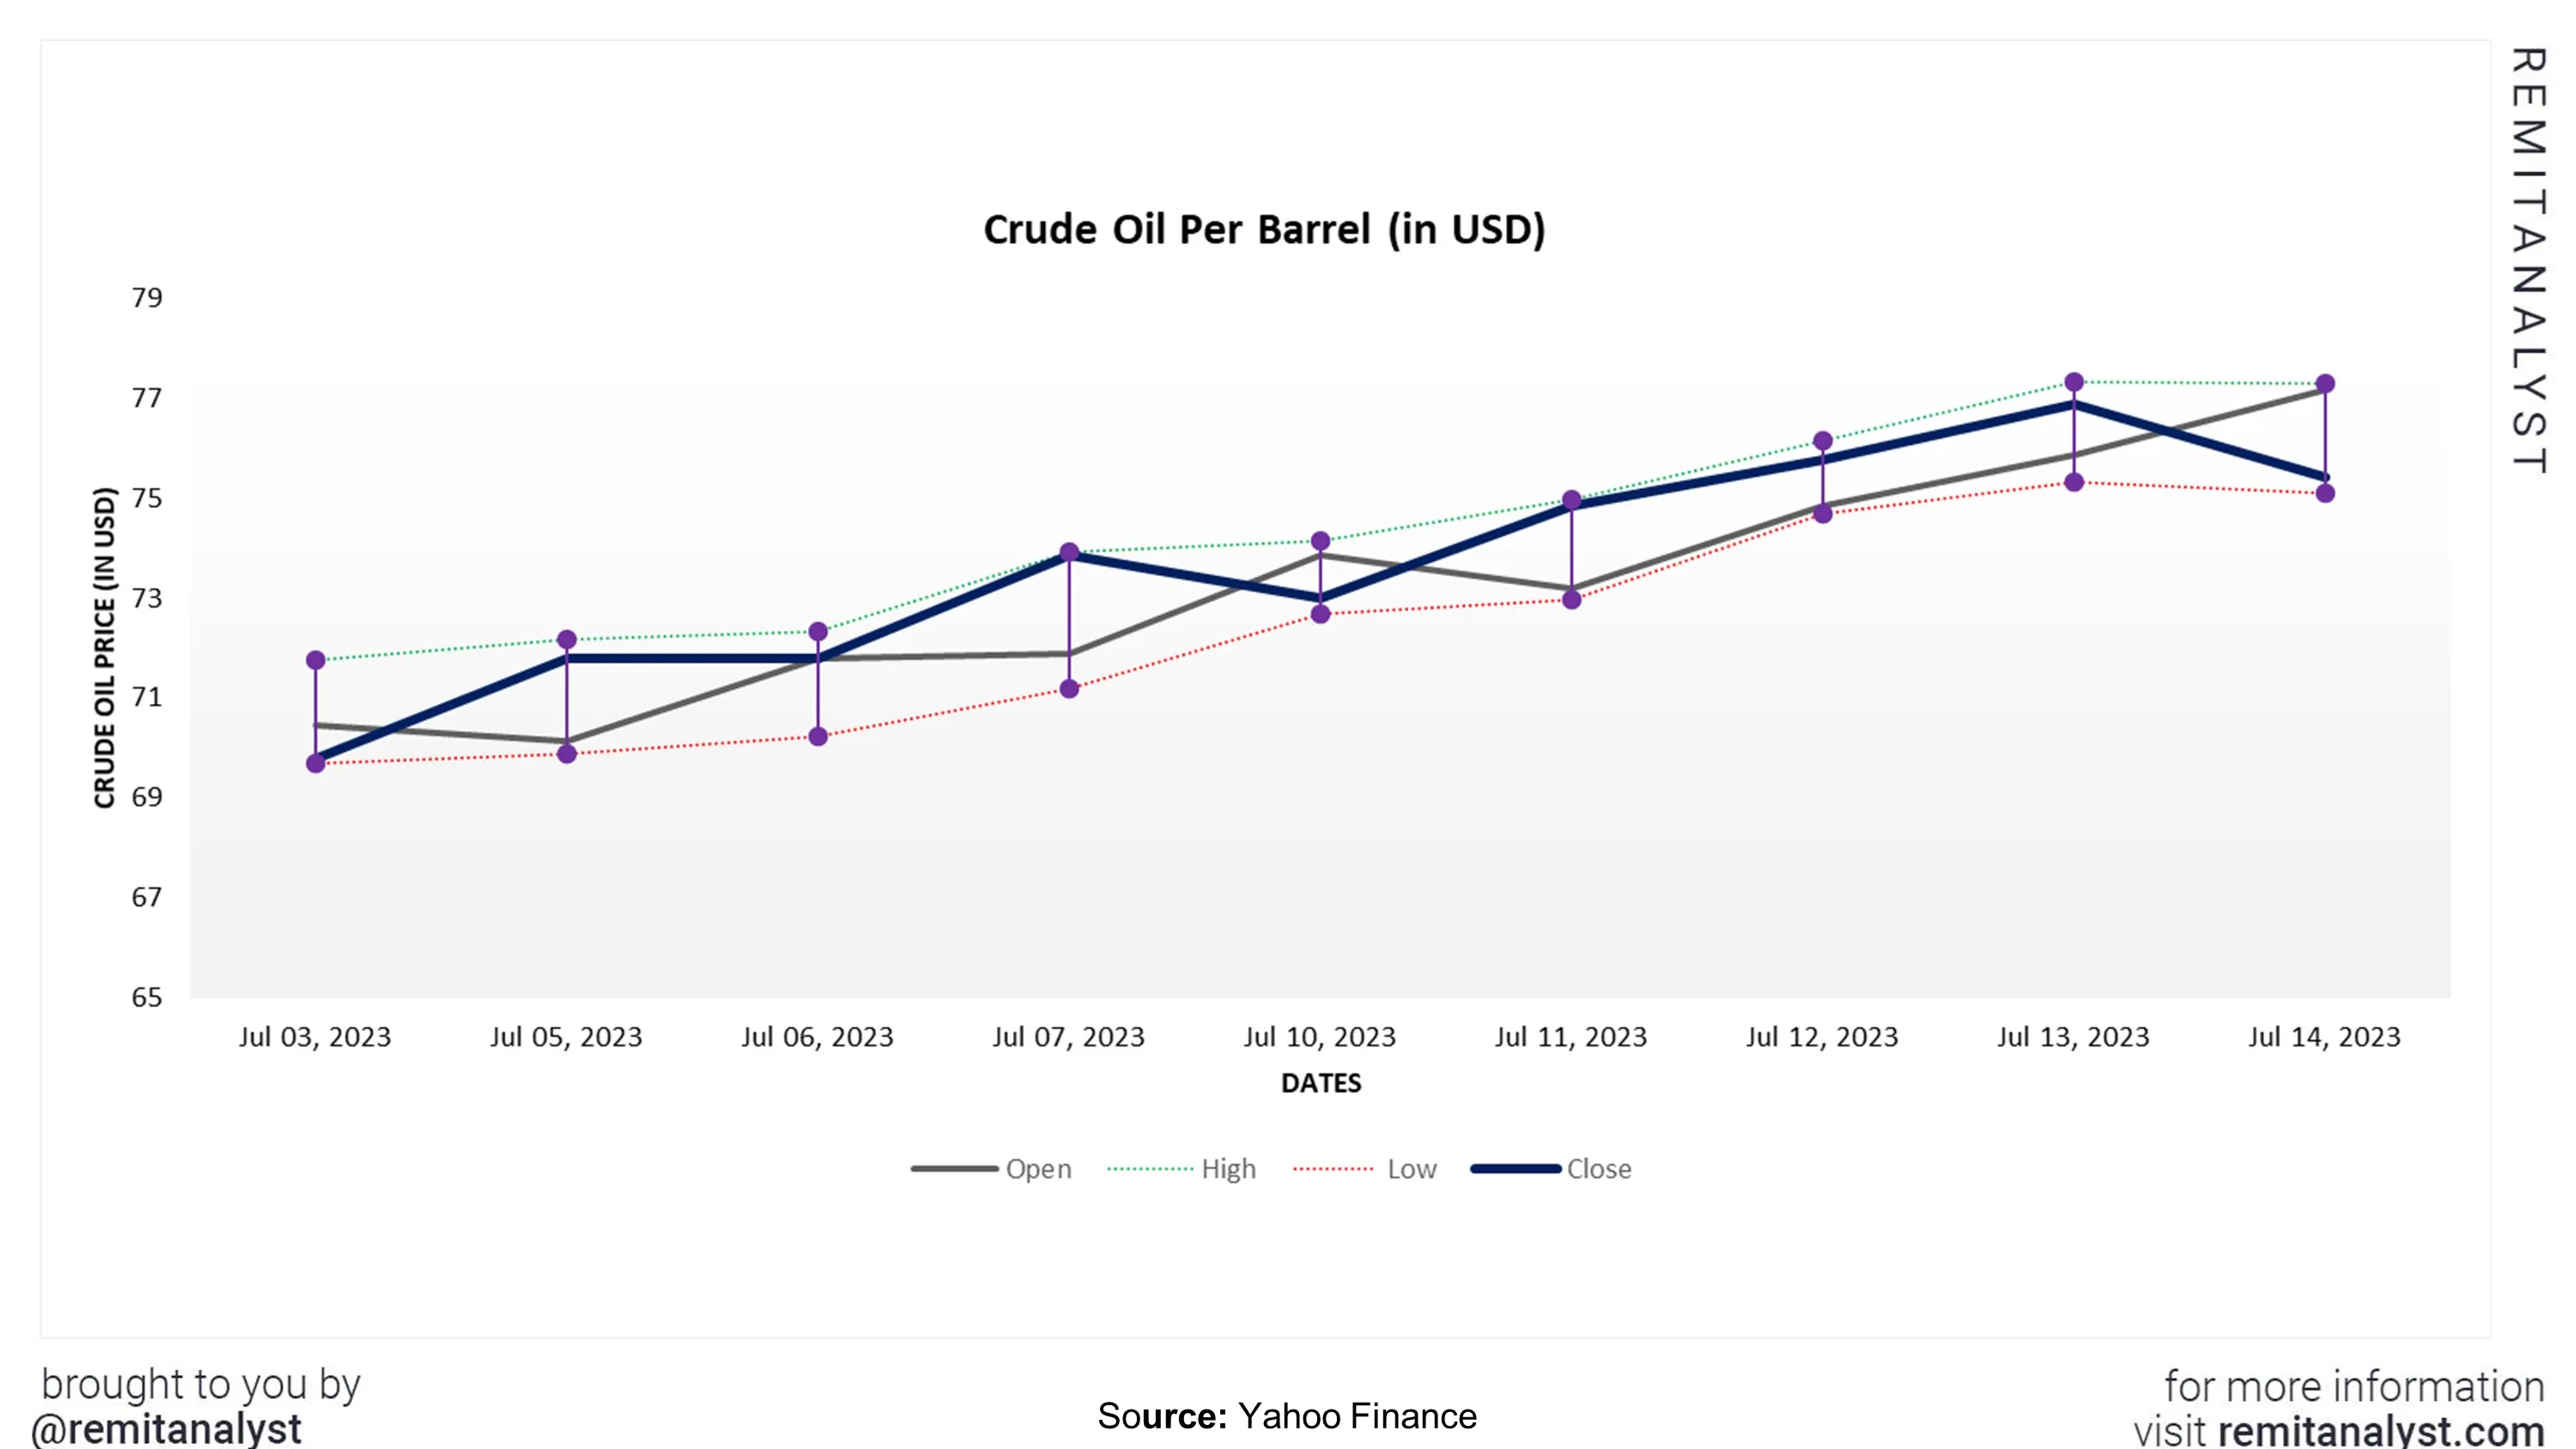 crude-oil-prices-from-3-jul-2023-to-14-jul-2023